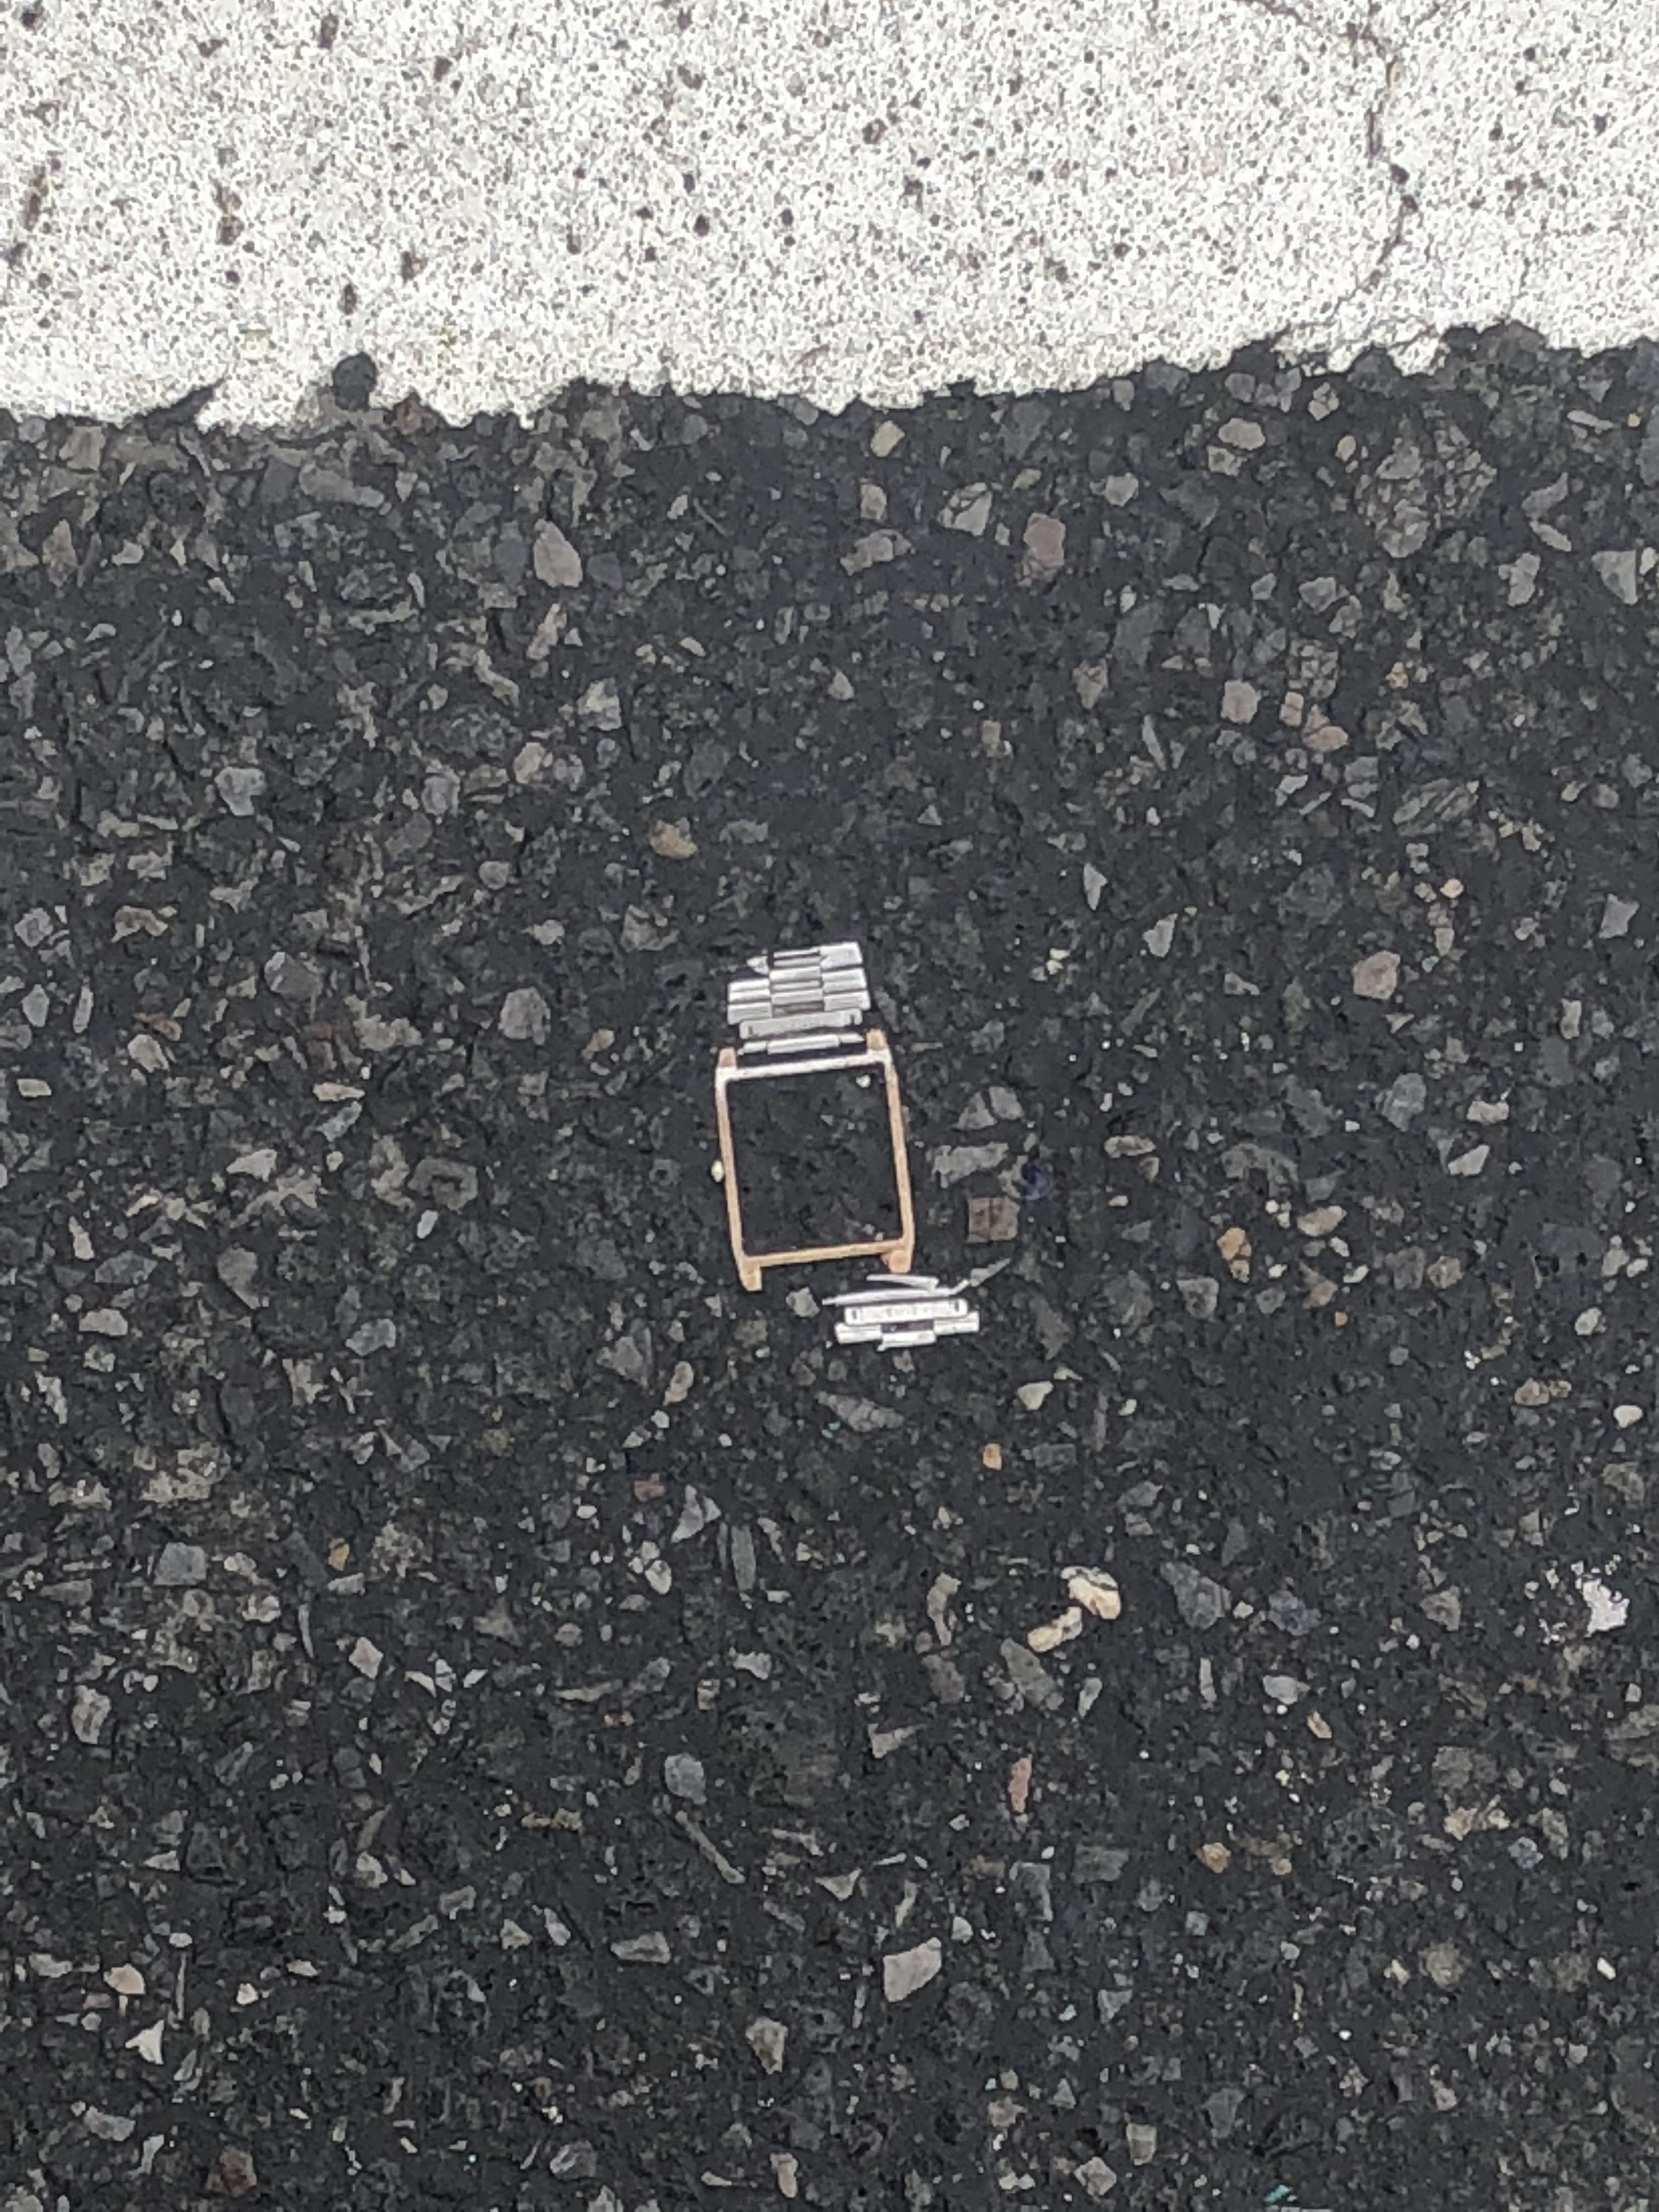 This watch in the road. : mildlyinteresting